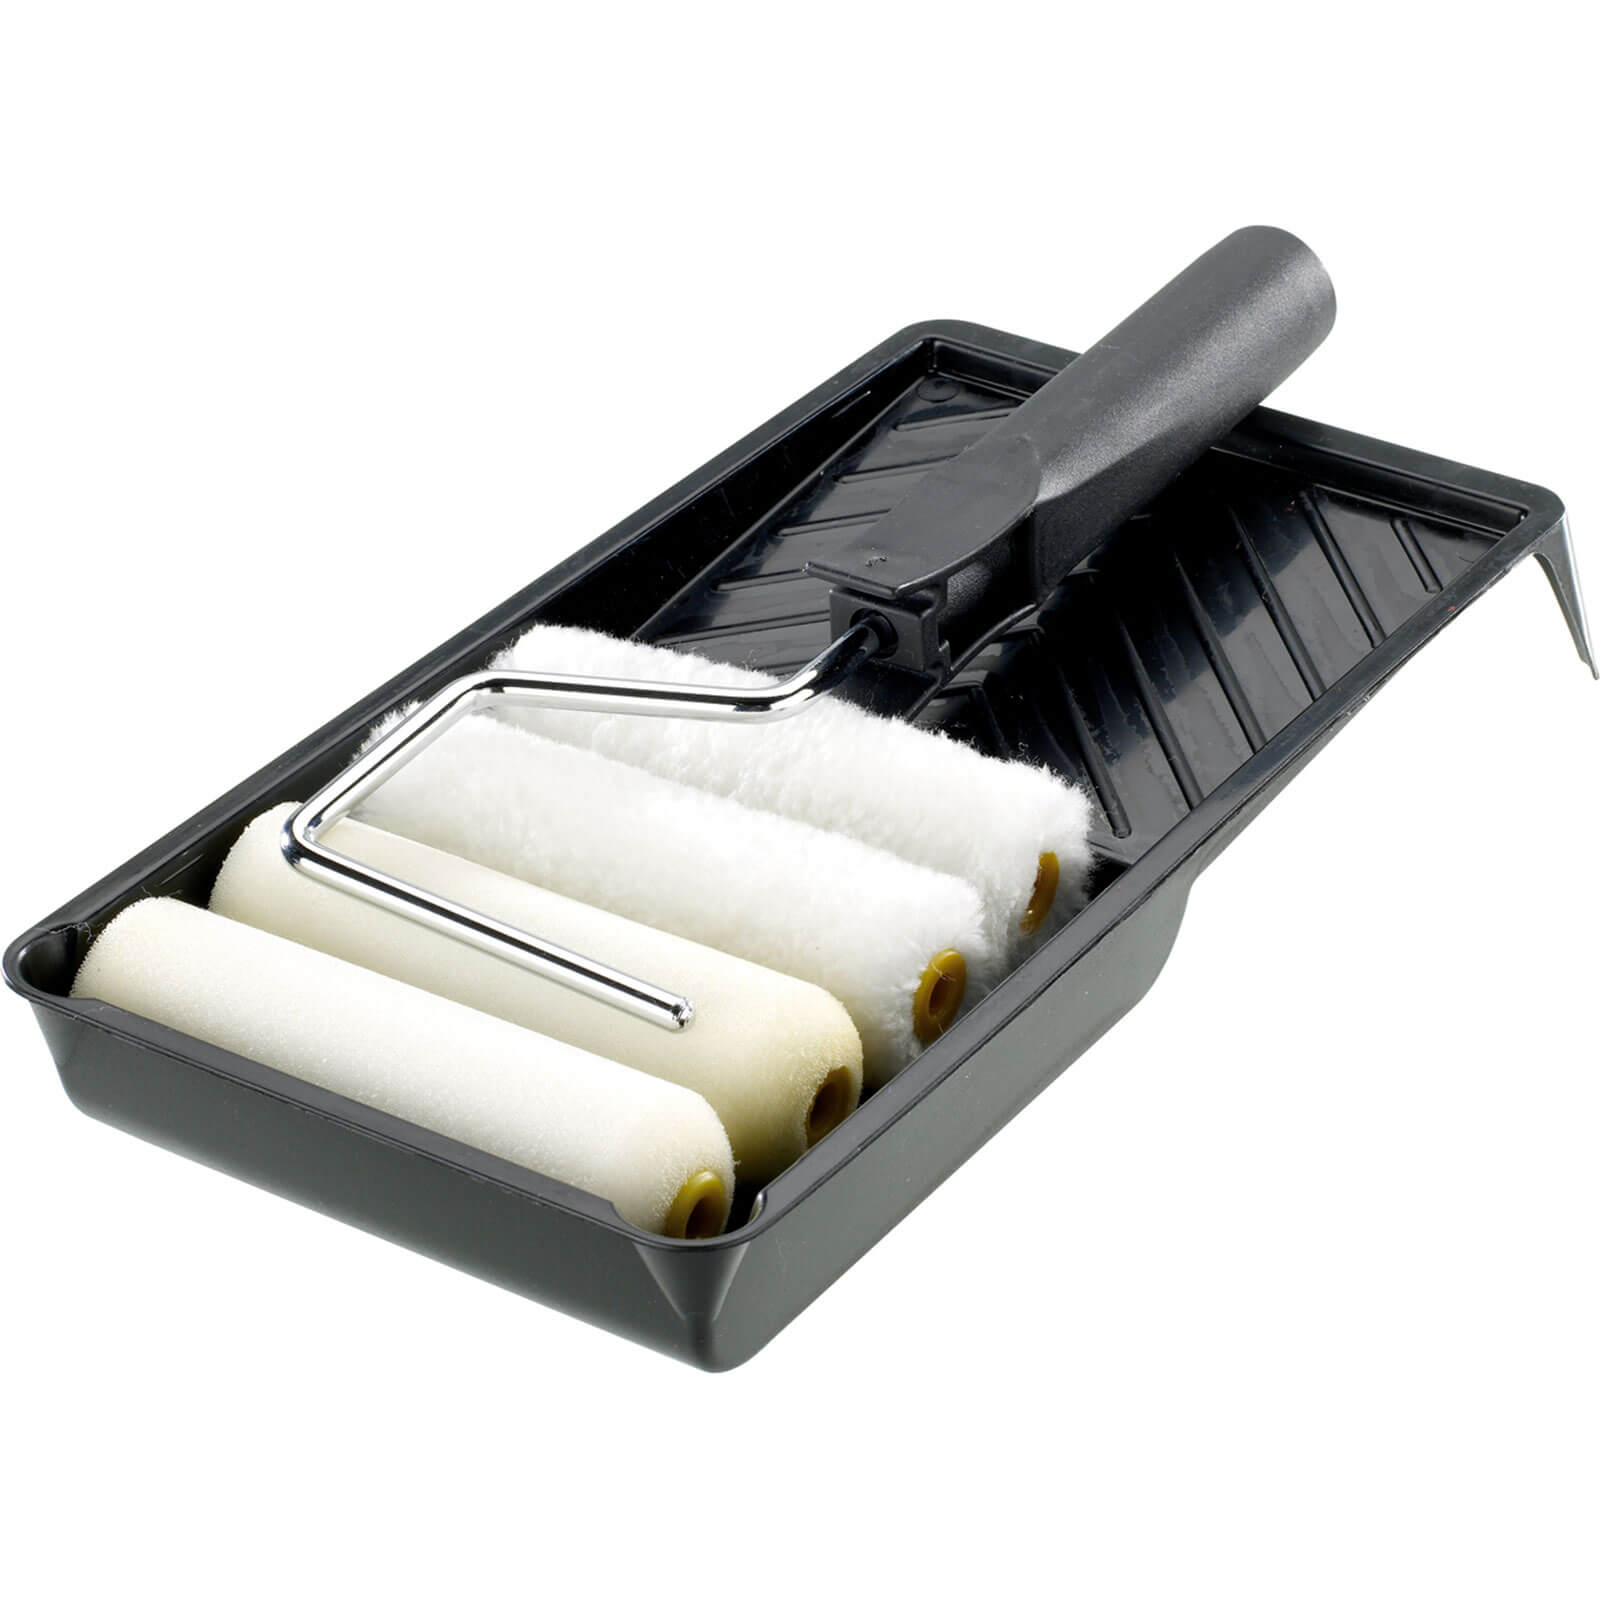 Stanley 100mm / 4" Paint Roller Tray Kit with 4 Paint Roller Sleeves